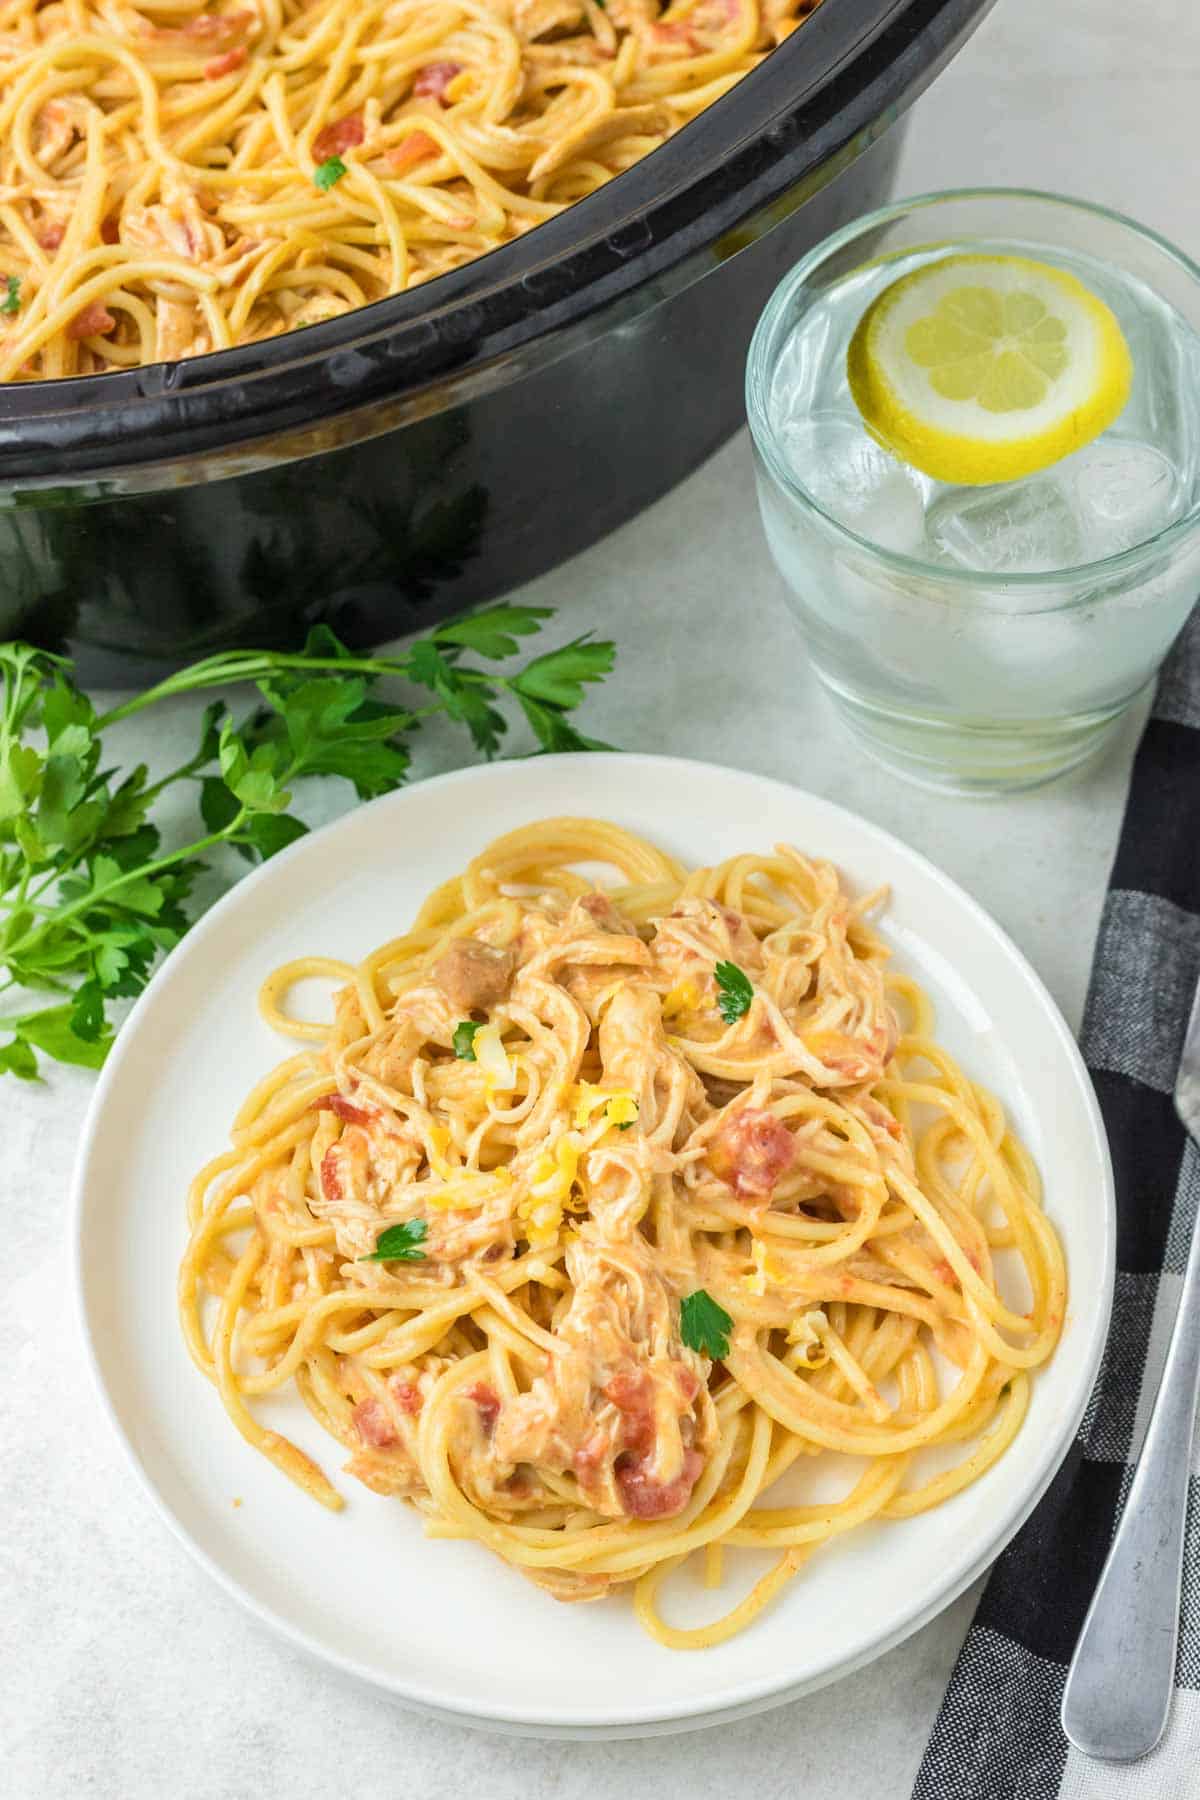 Chicken spaghetti in a crockpot and on a plate.